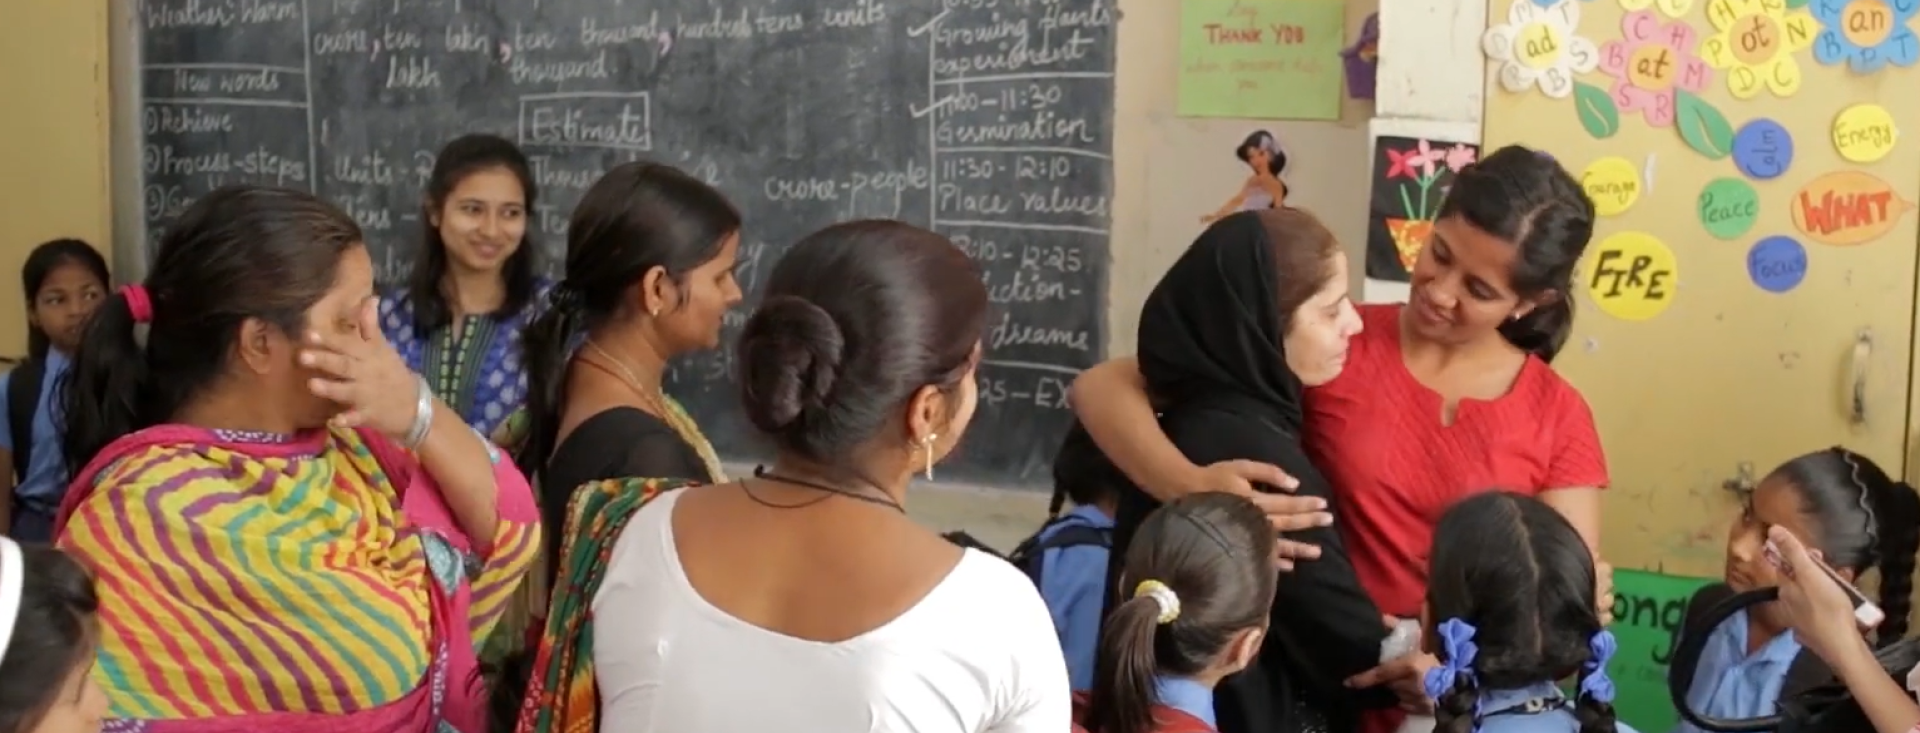 In a classroom, a young Indian woman in a red dress has her arm around another woman with a head scarf, surrounded by other women and girls in school uniform